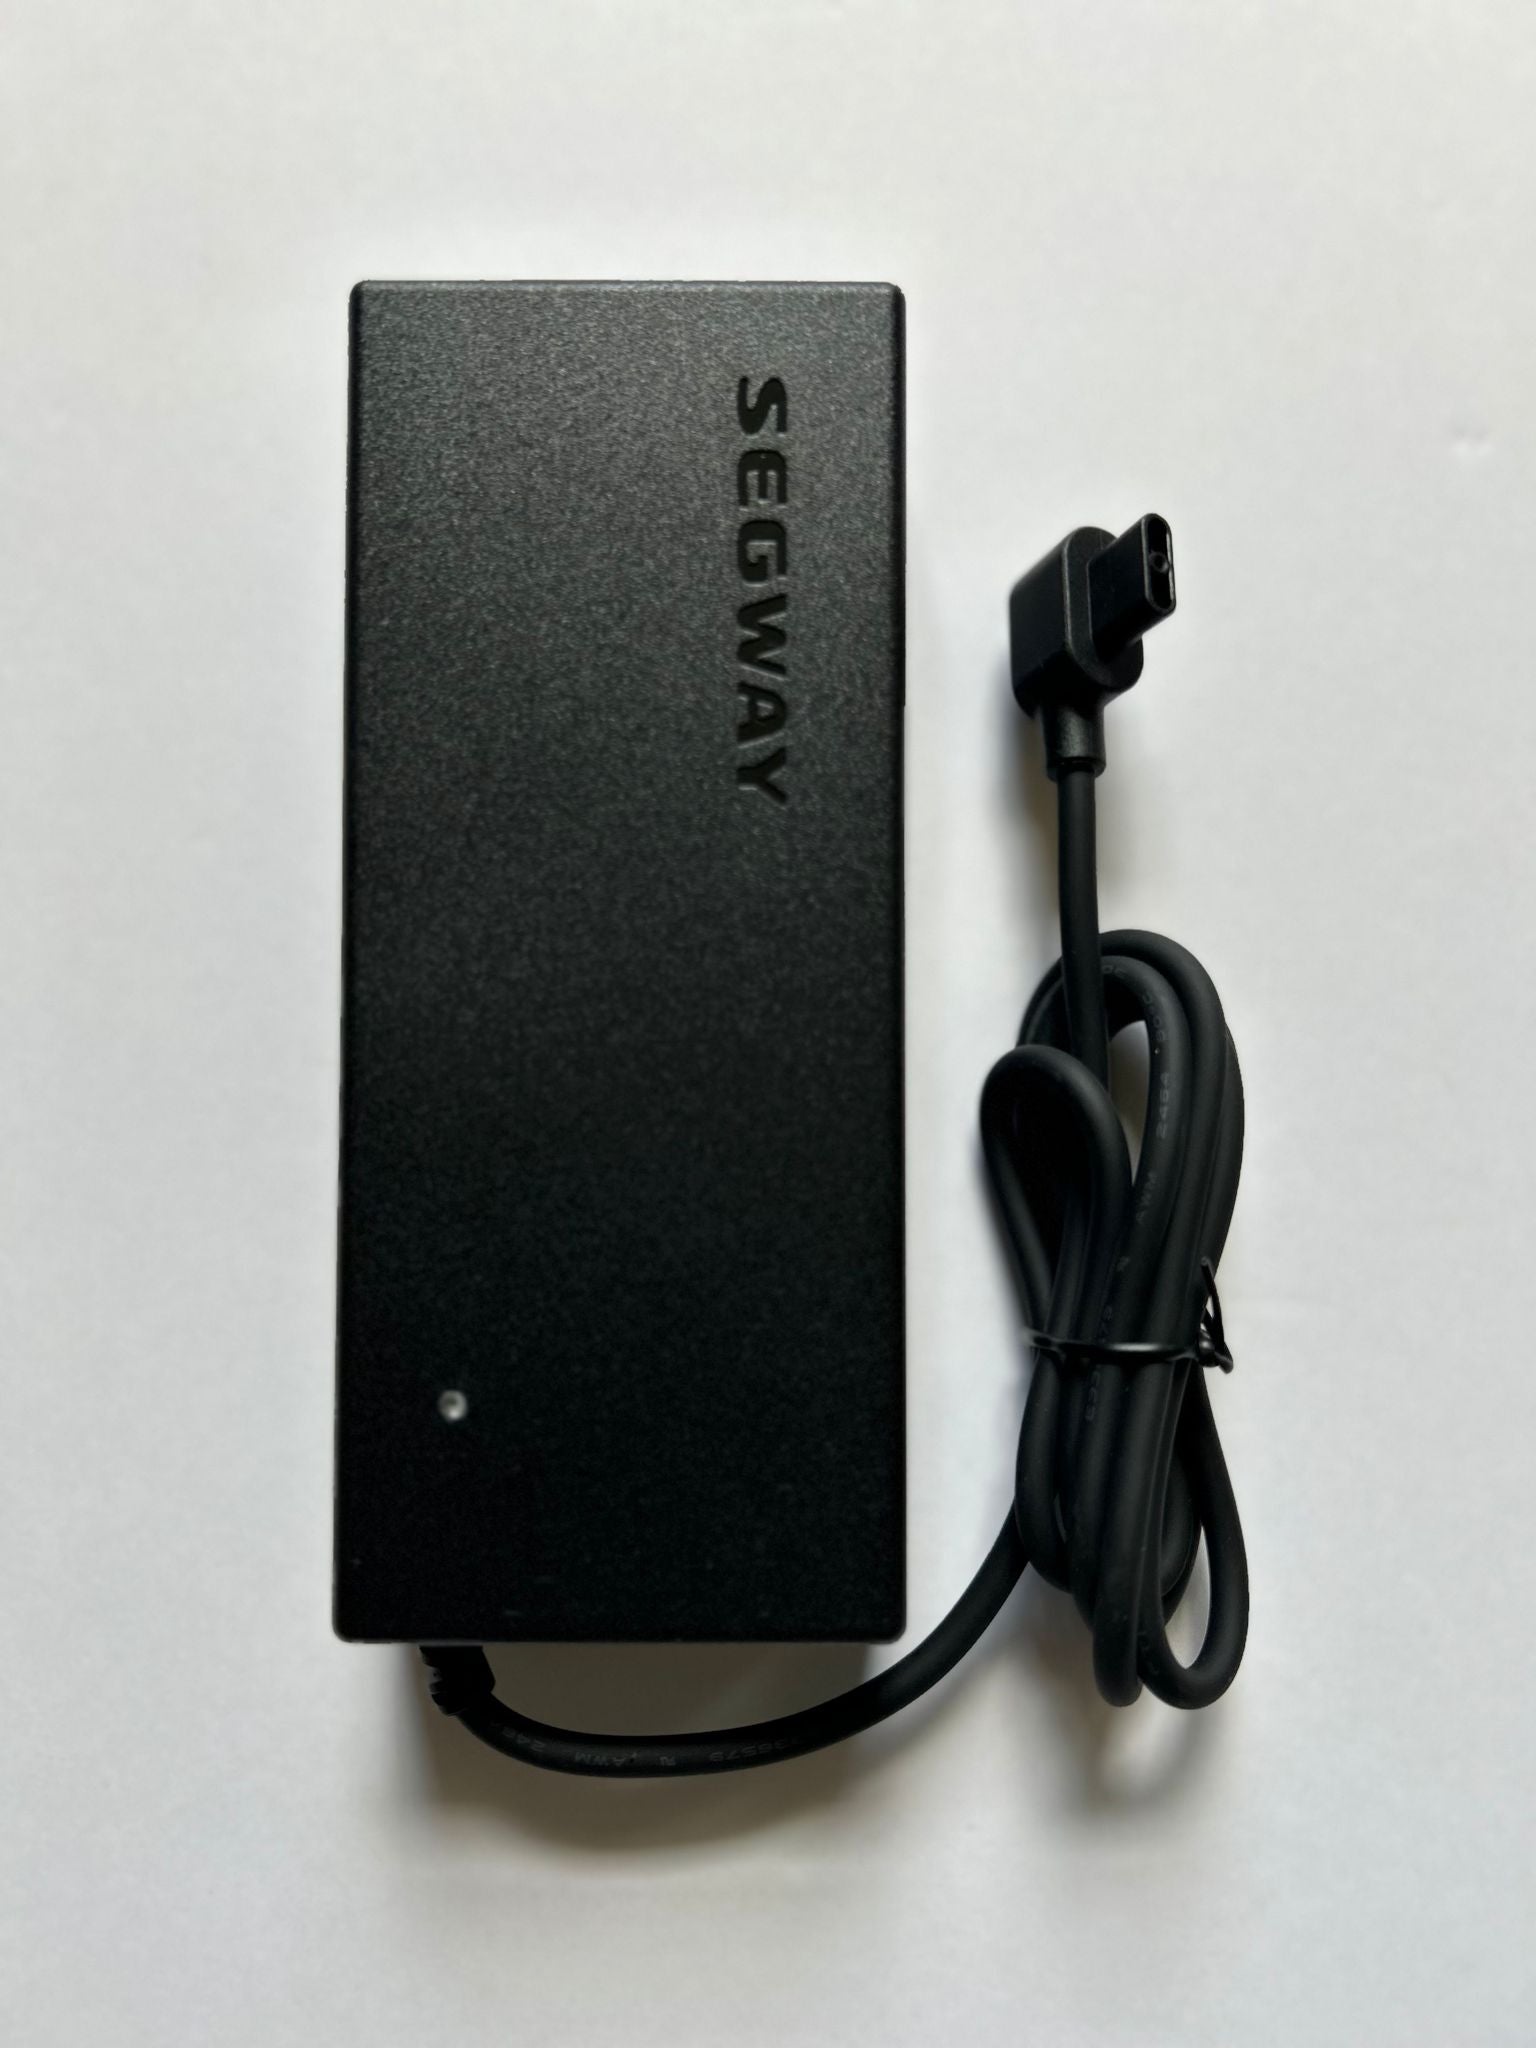 Power Charger Kit for Segway miniPLUS and Ninebot S Plus